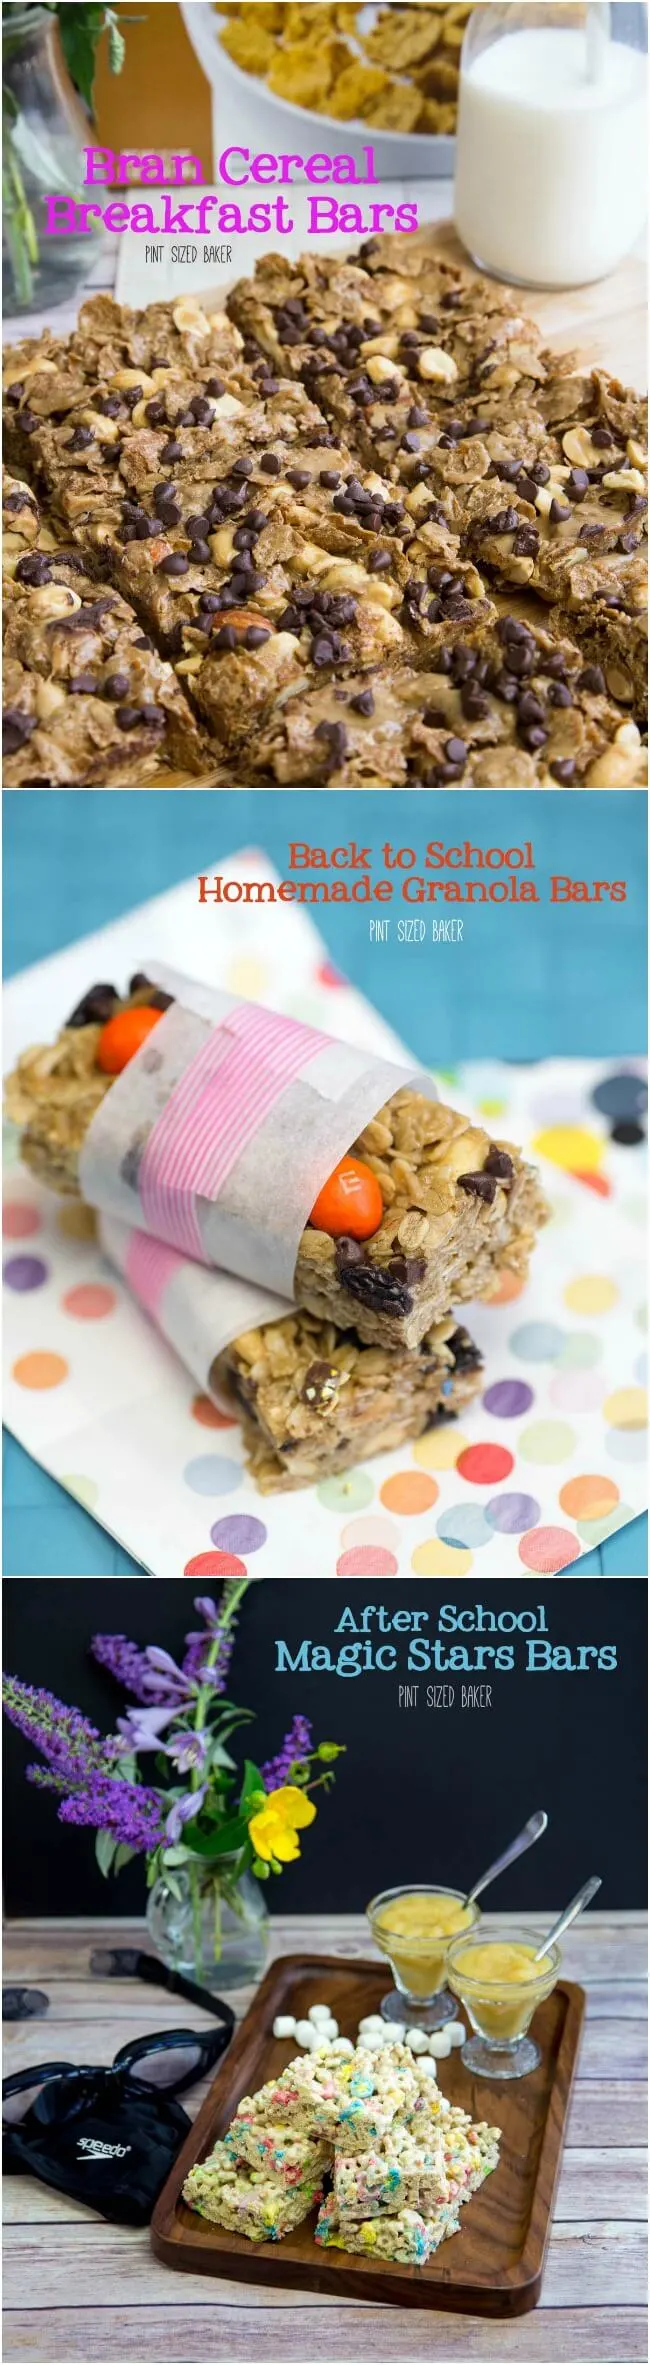 Make back to school easy with Harris Teeter. These Back to School Cereal bars are ready for breakfast, lunch box, and after school!